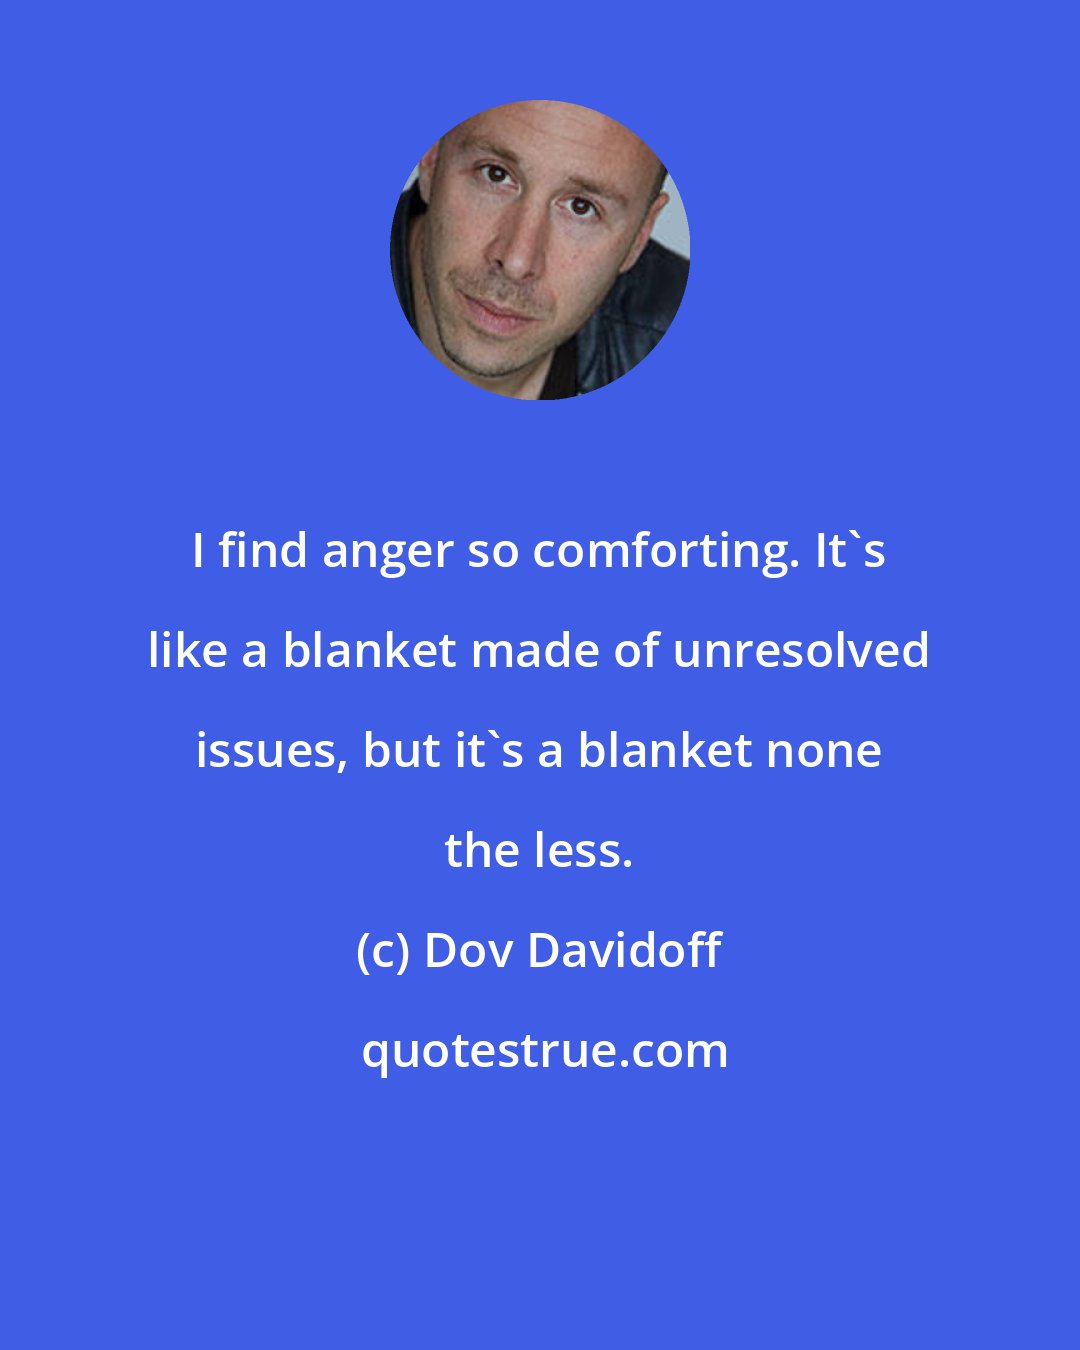 Dov Davidoff: I find anger so comforting. It's like a blanket made of unresolved issues, but it's a blanket none the less.